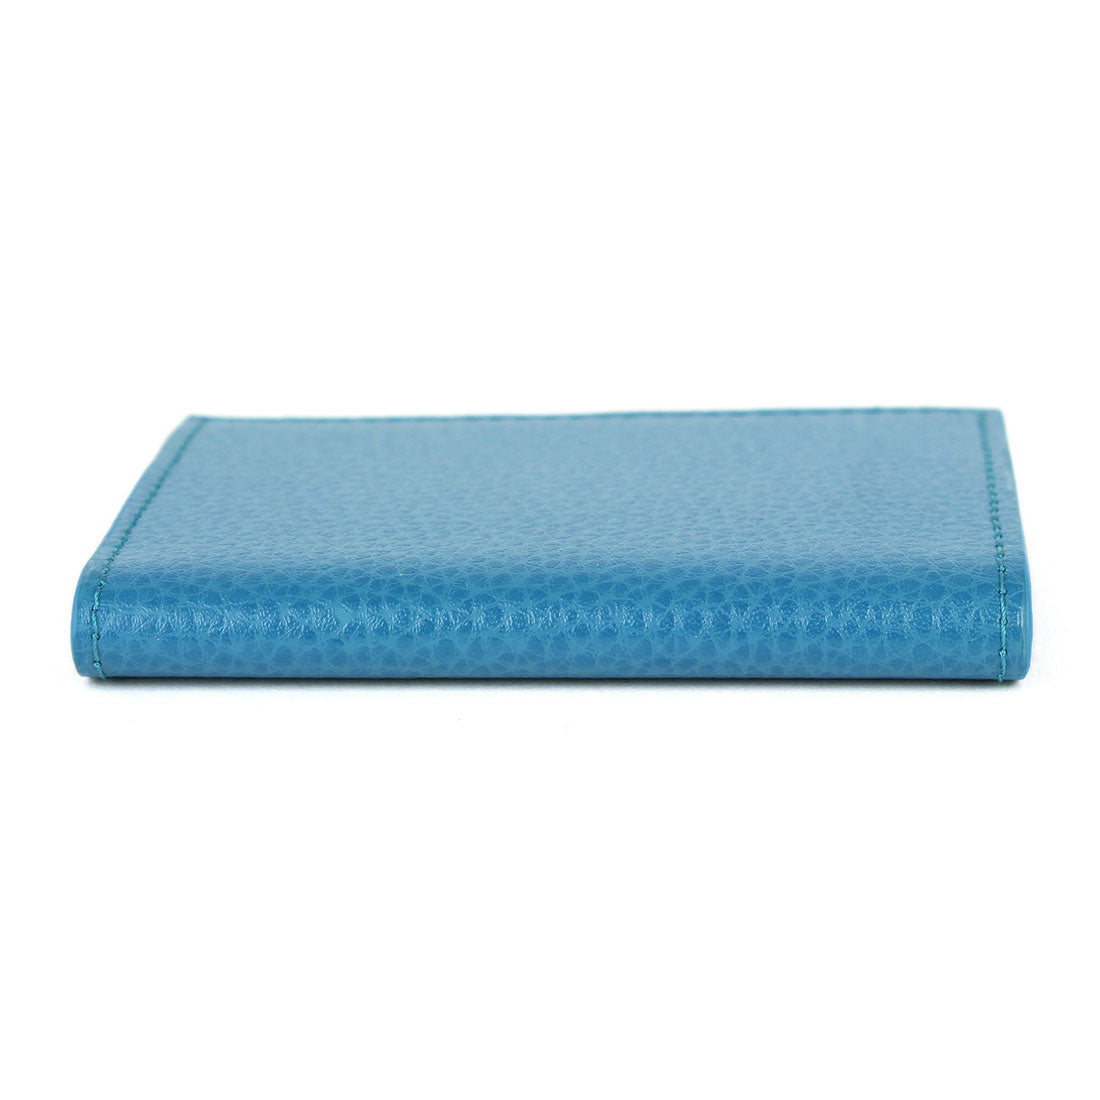 12-Card Holder - Turquoise#color_laurige-turquoise